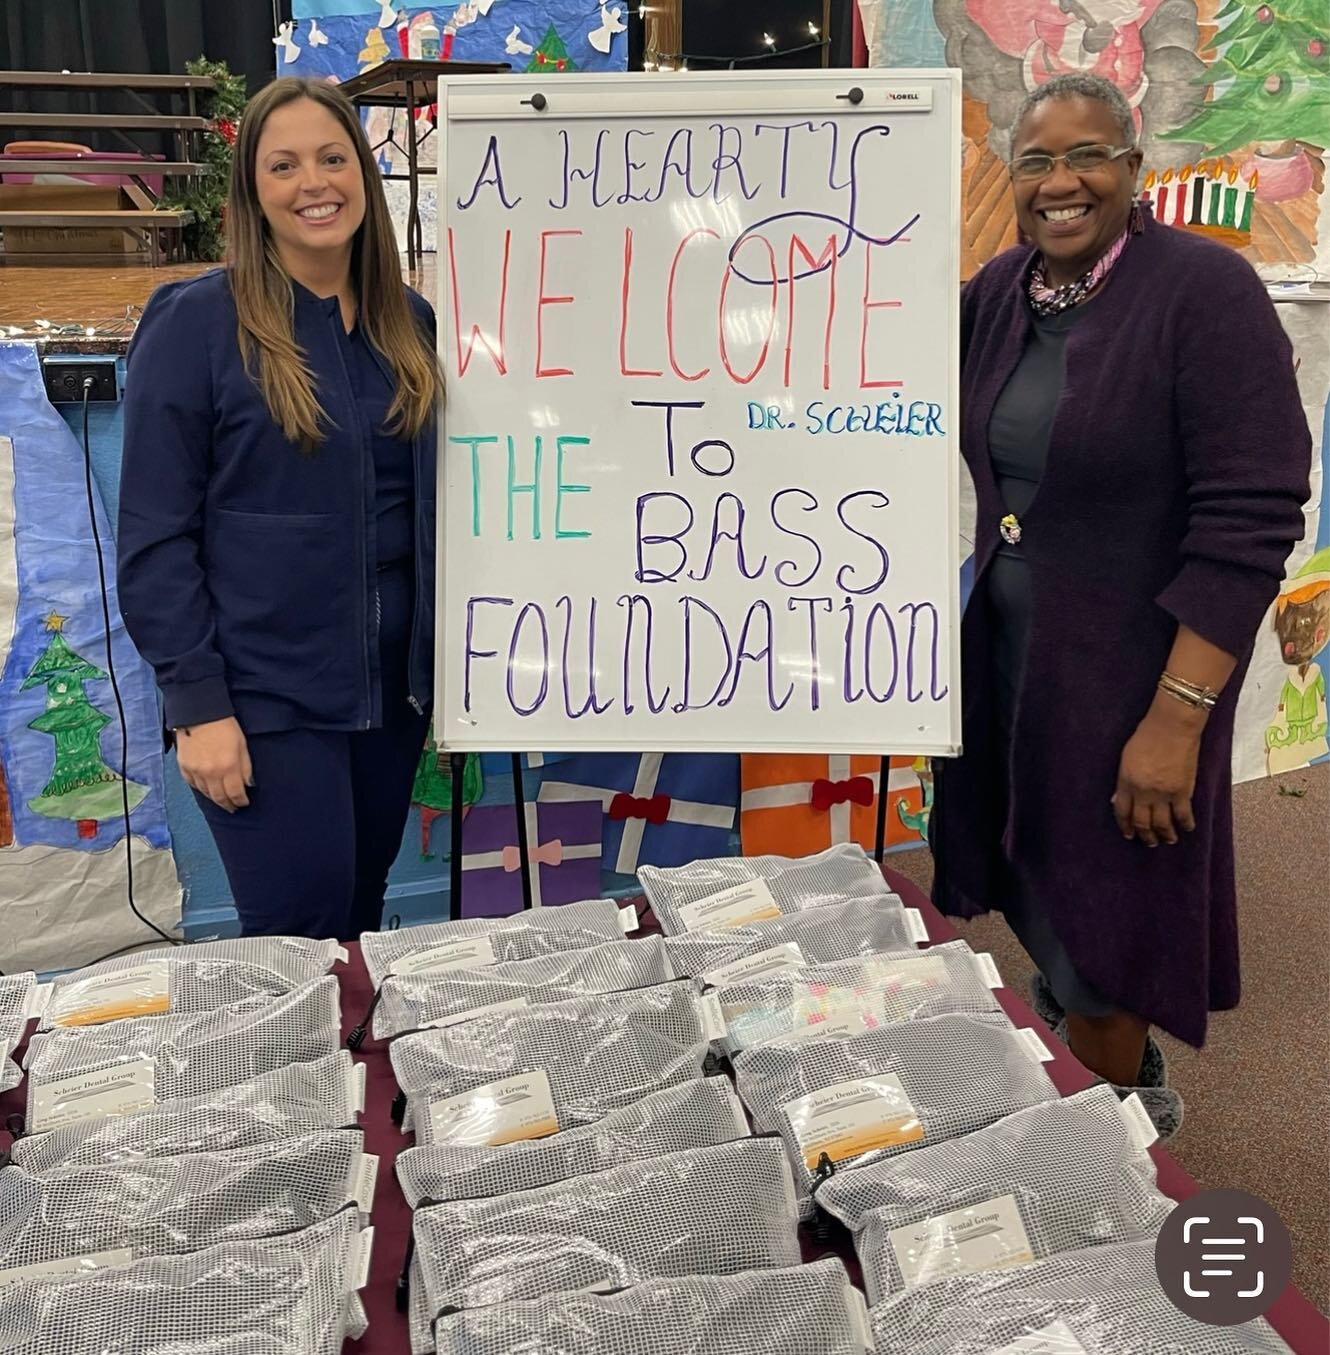 We had a fantastic morning of learning with 4th and 5th graders! Together with the staff of Scheier Dental, students  learned the importance of dental hygiene. Each student was gifted special bags packed with dental kits as well as other wellness ite